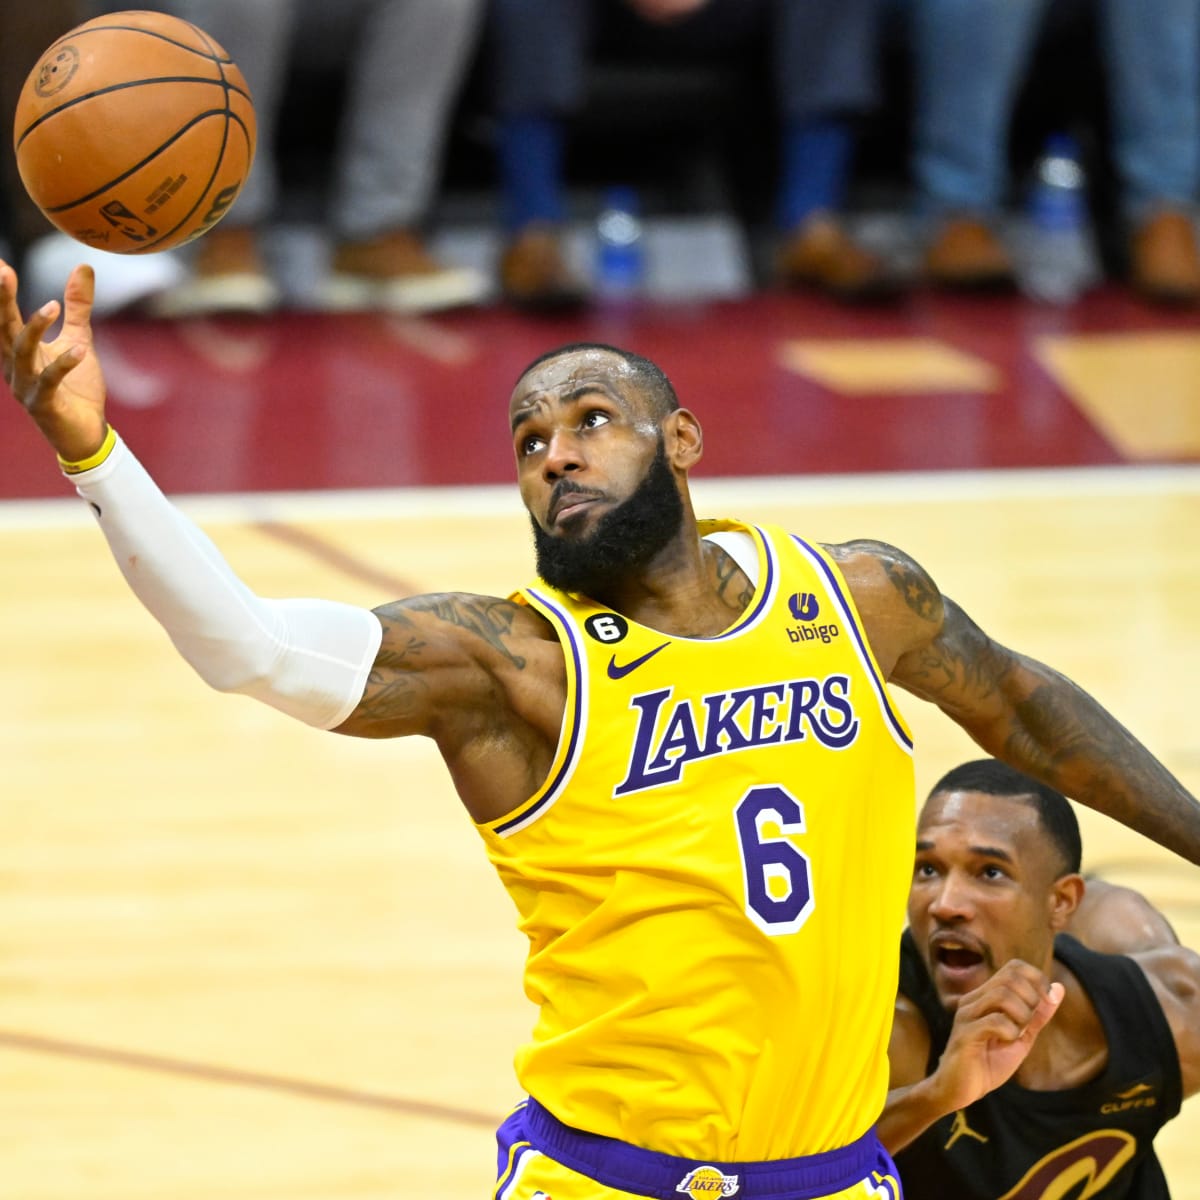 LeBron James: Top 10 highest-paid athletes in 2022